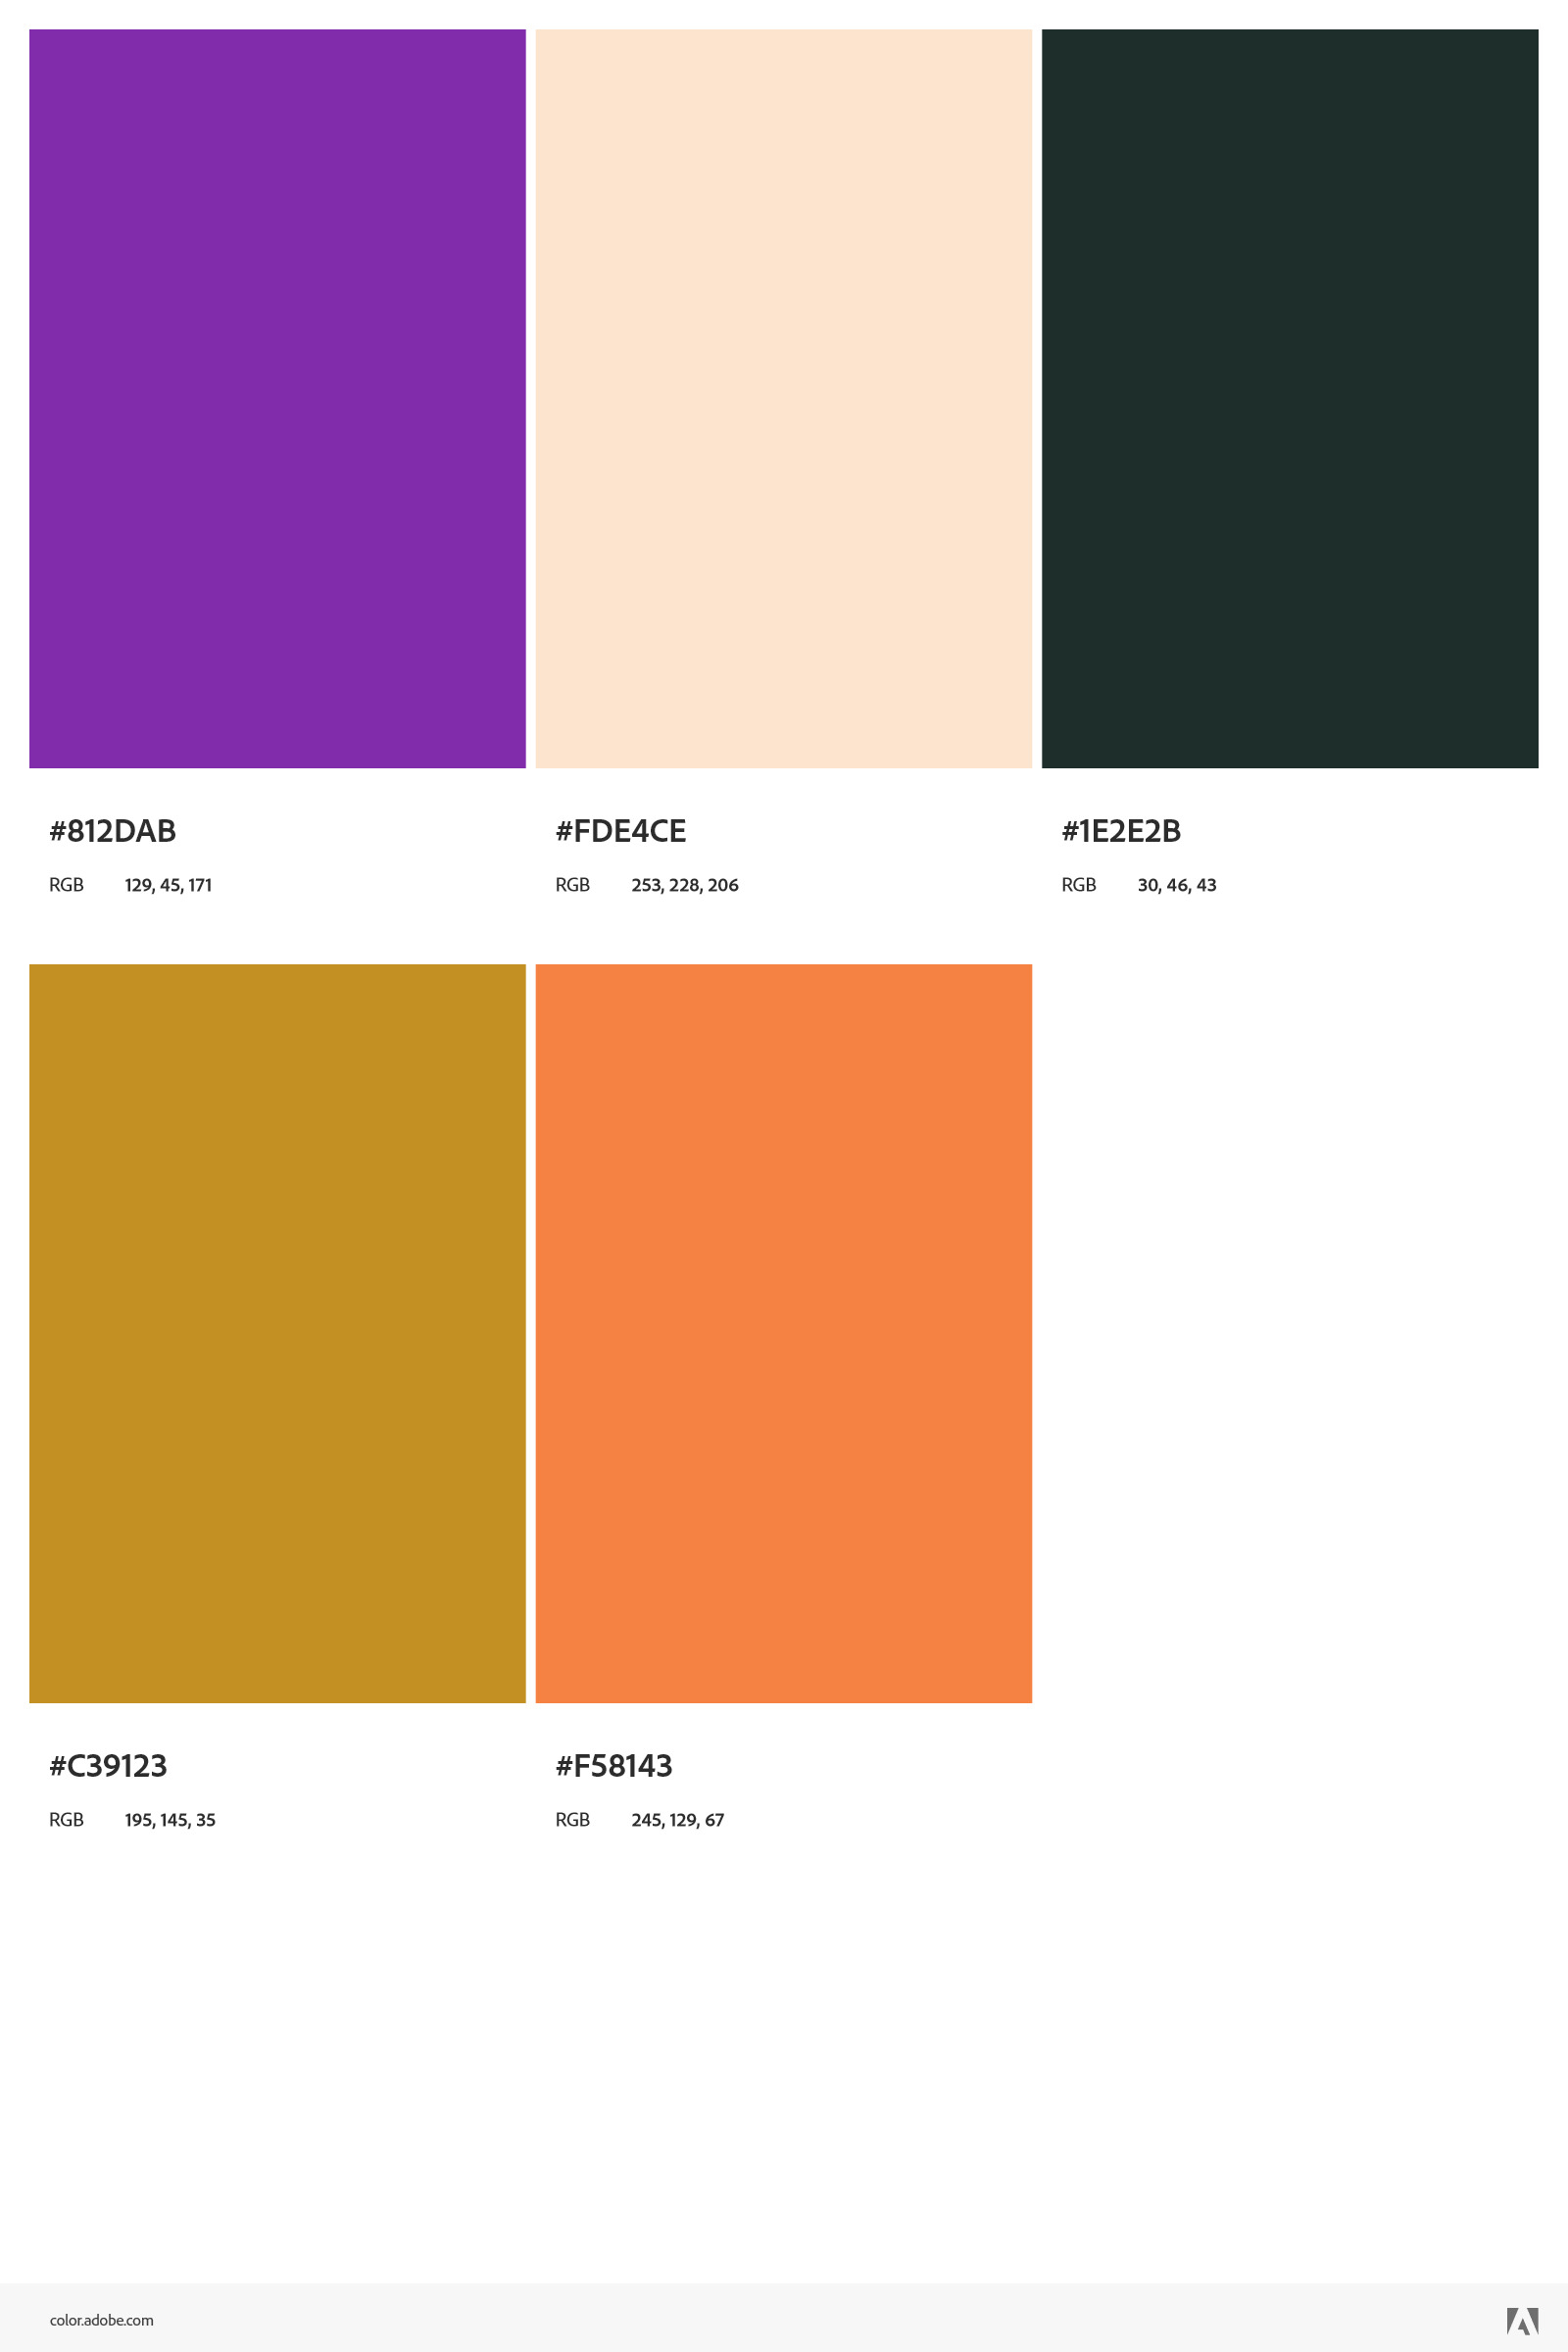 Color palette of the project.